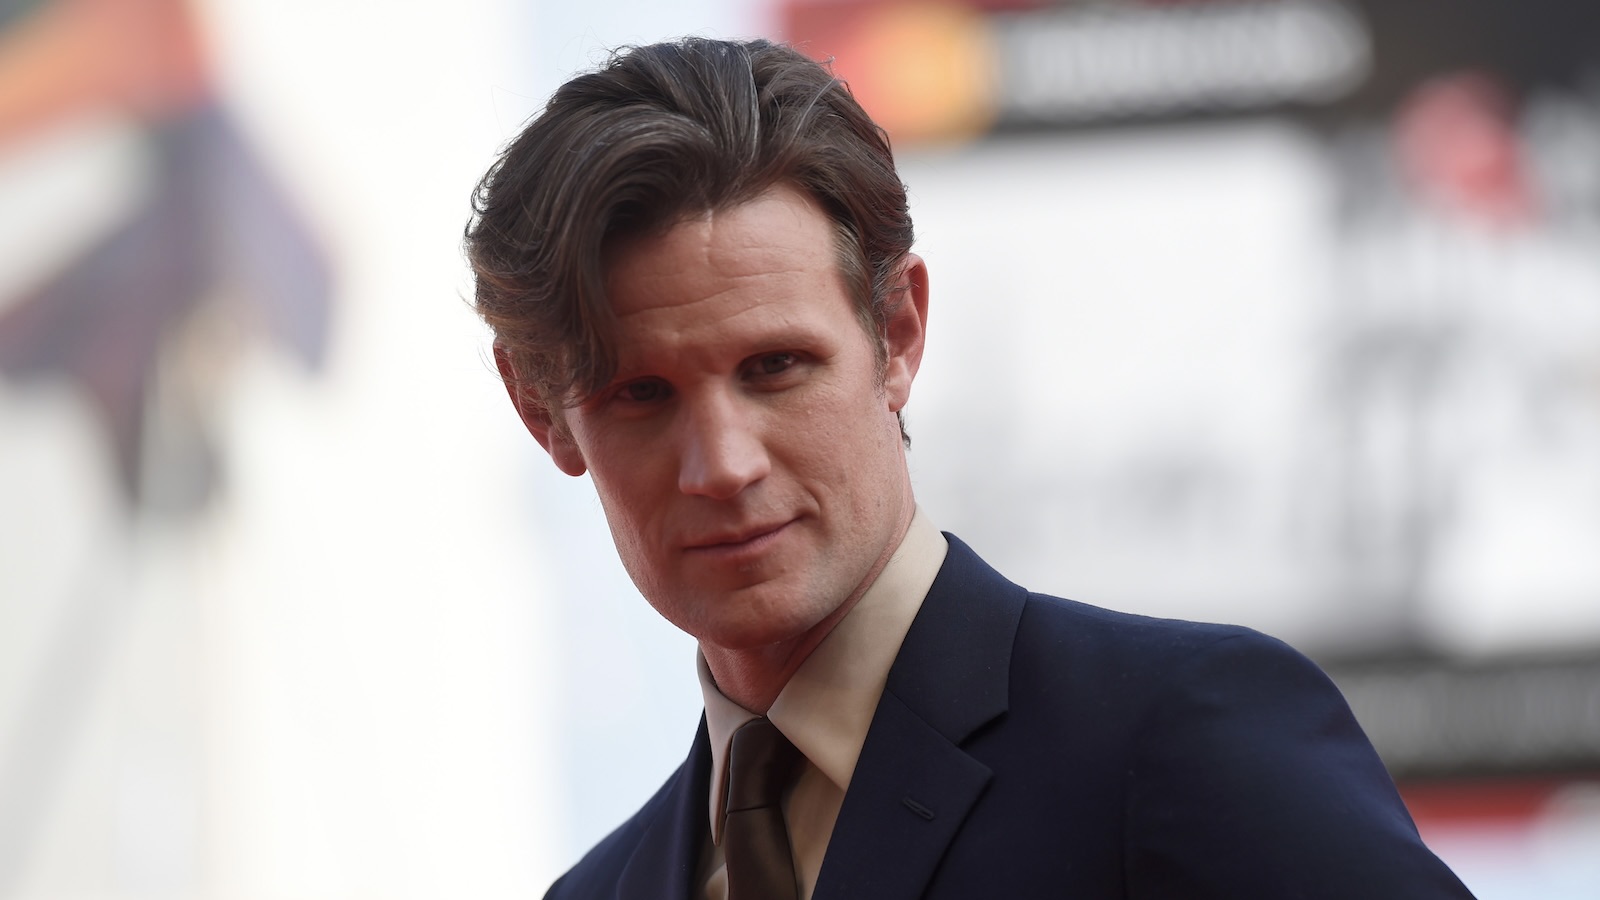 Matt Smith walks the red carpet ahead of the 'My Brilliant Friend (L'Amica Geniale)' screening during the 75th Venice Film Festival at Sala Grande on September 2, 2018 in Venice, Italy.